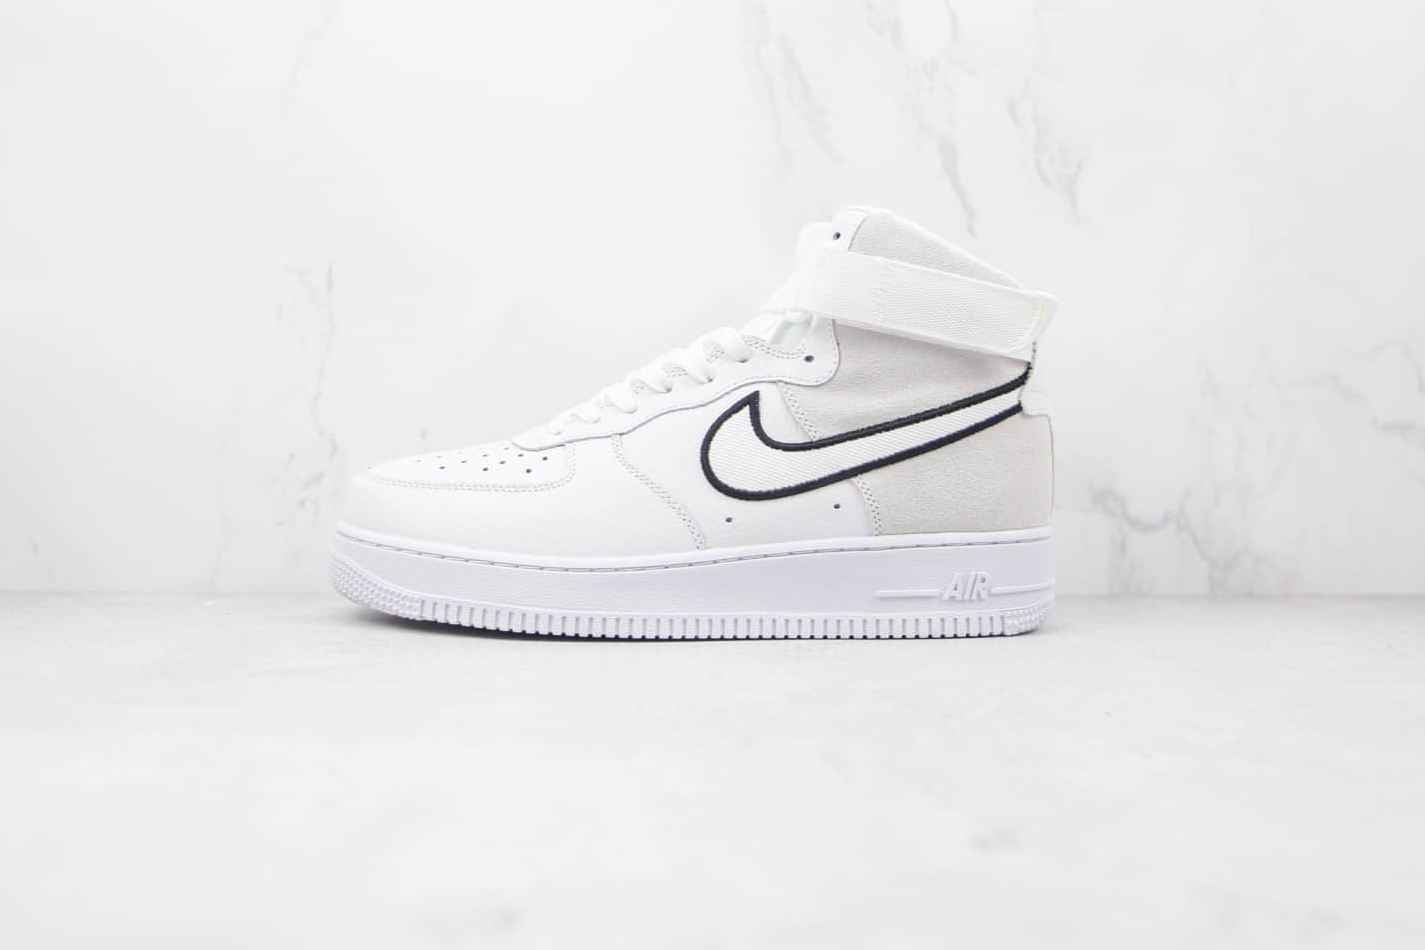 Nike Air Force 1 High 'White Vast Grey' AO2442-100 | Buy Authentic Shoes Online